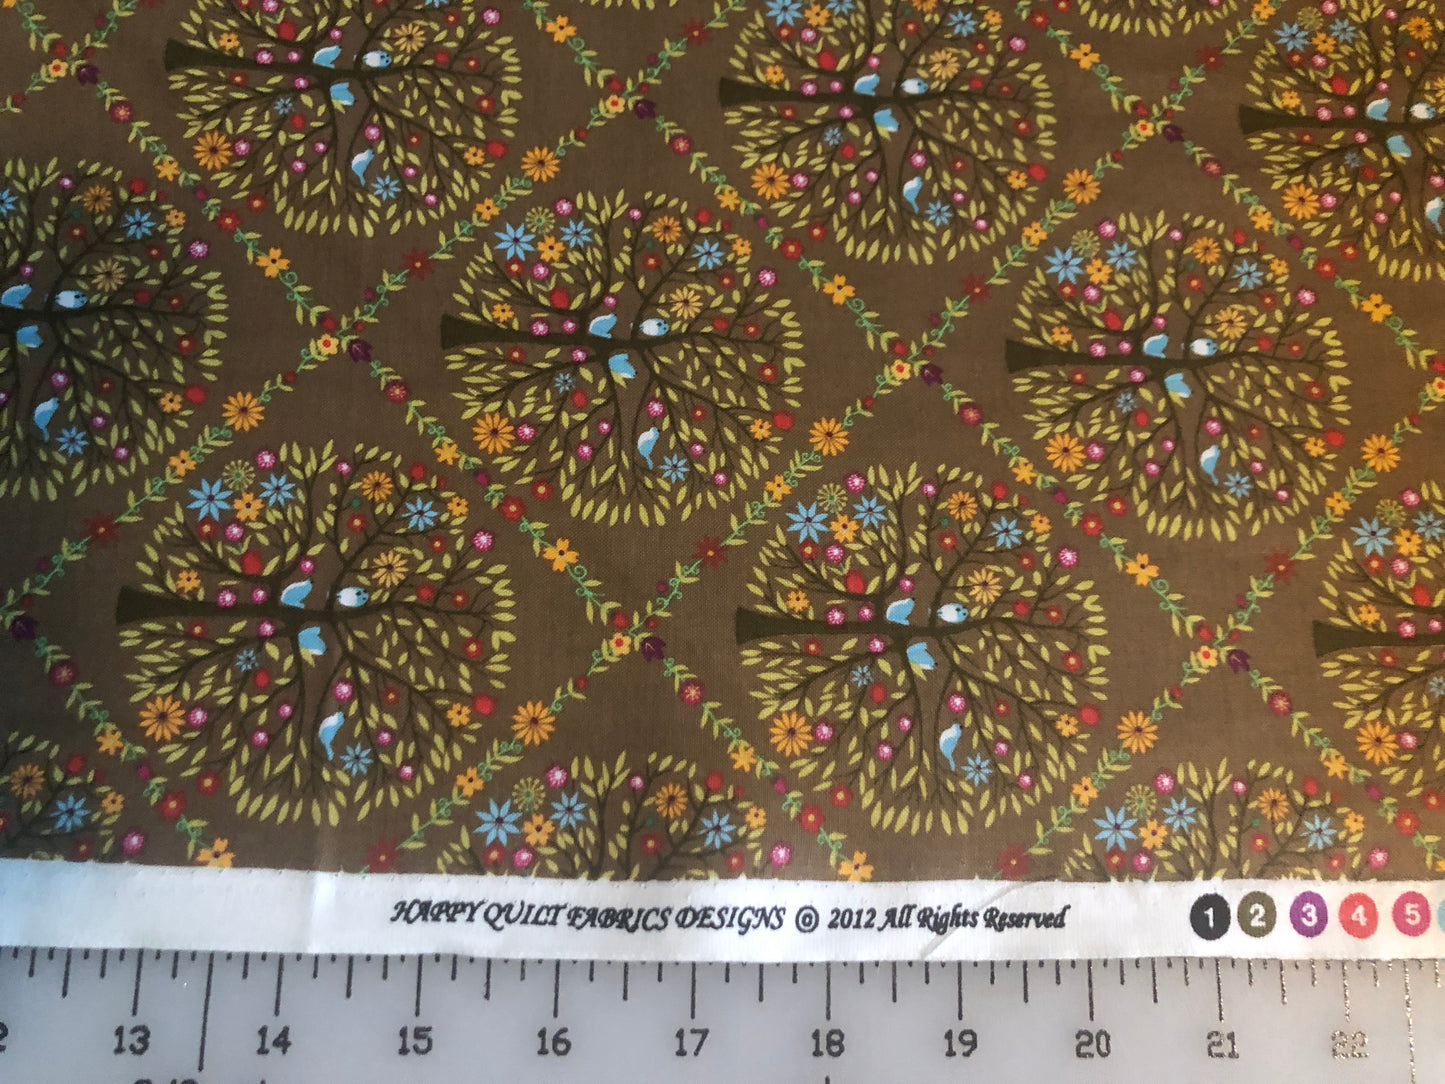 Colorful Floral Circular Tree Cotton Quilting Fabric by Happy Quilt Fabric Designs